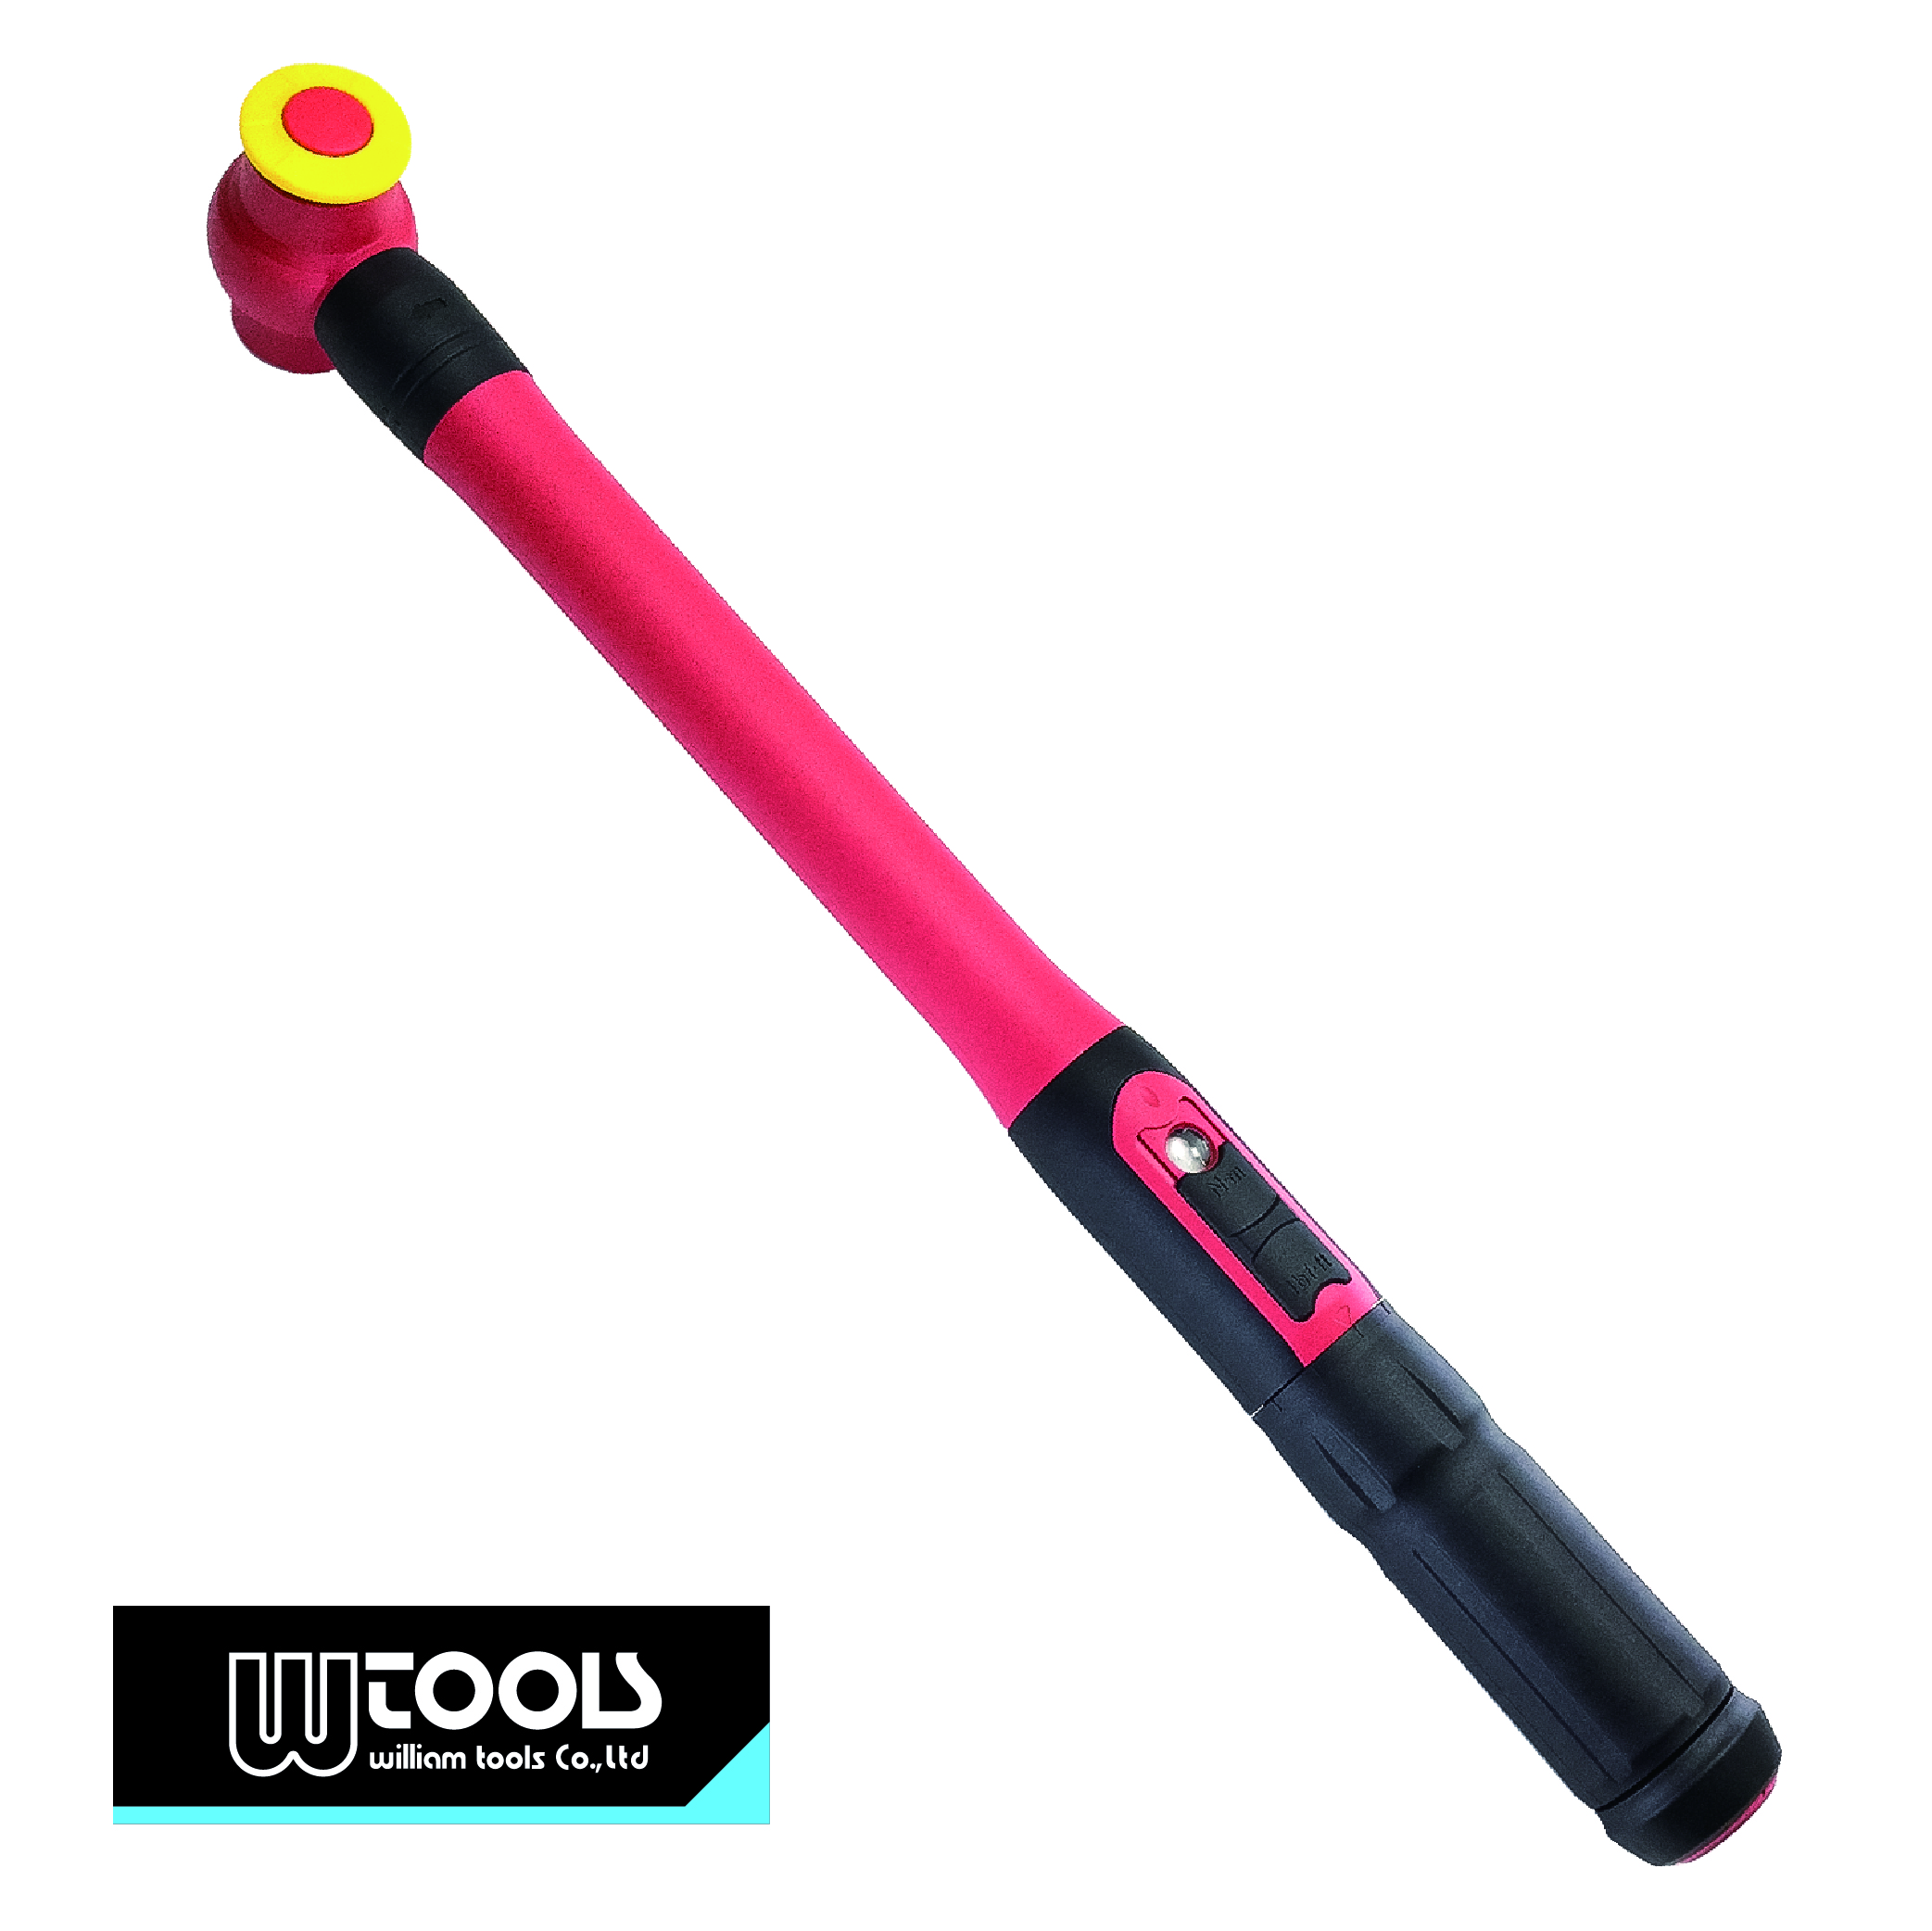 VDE Insulated Torque Wrench